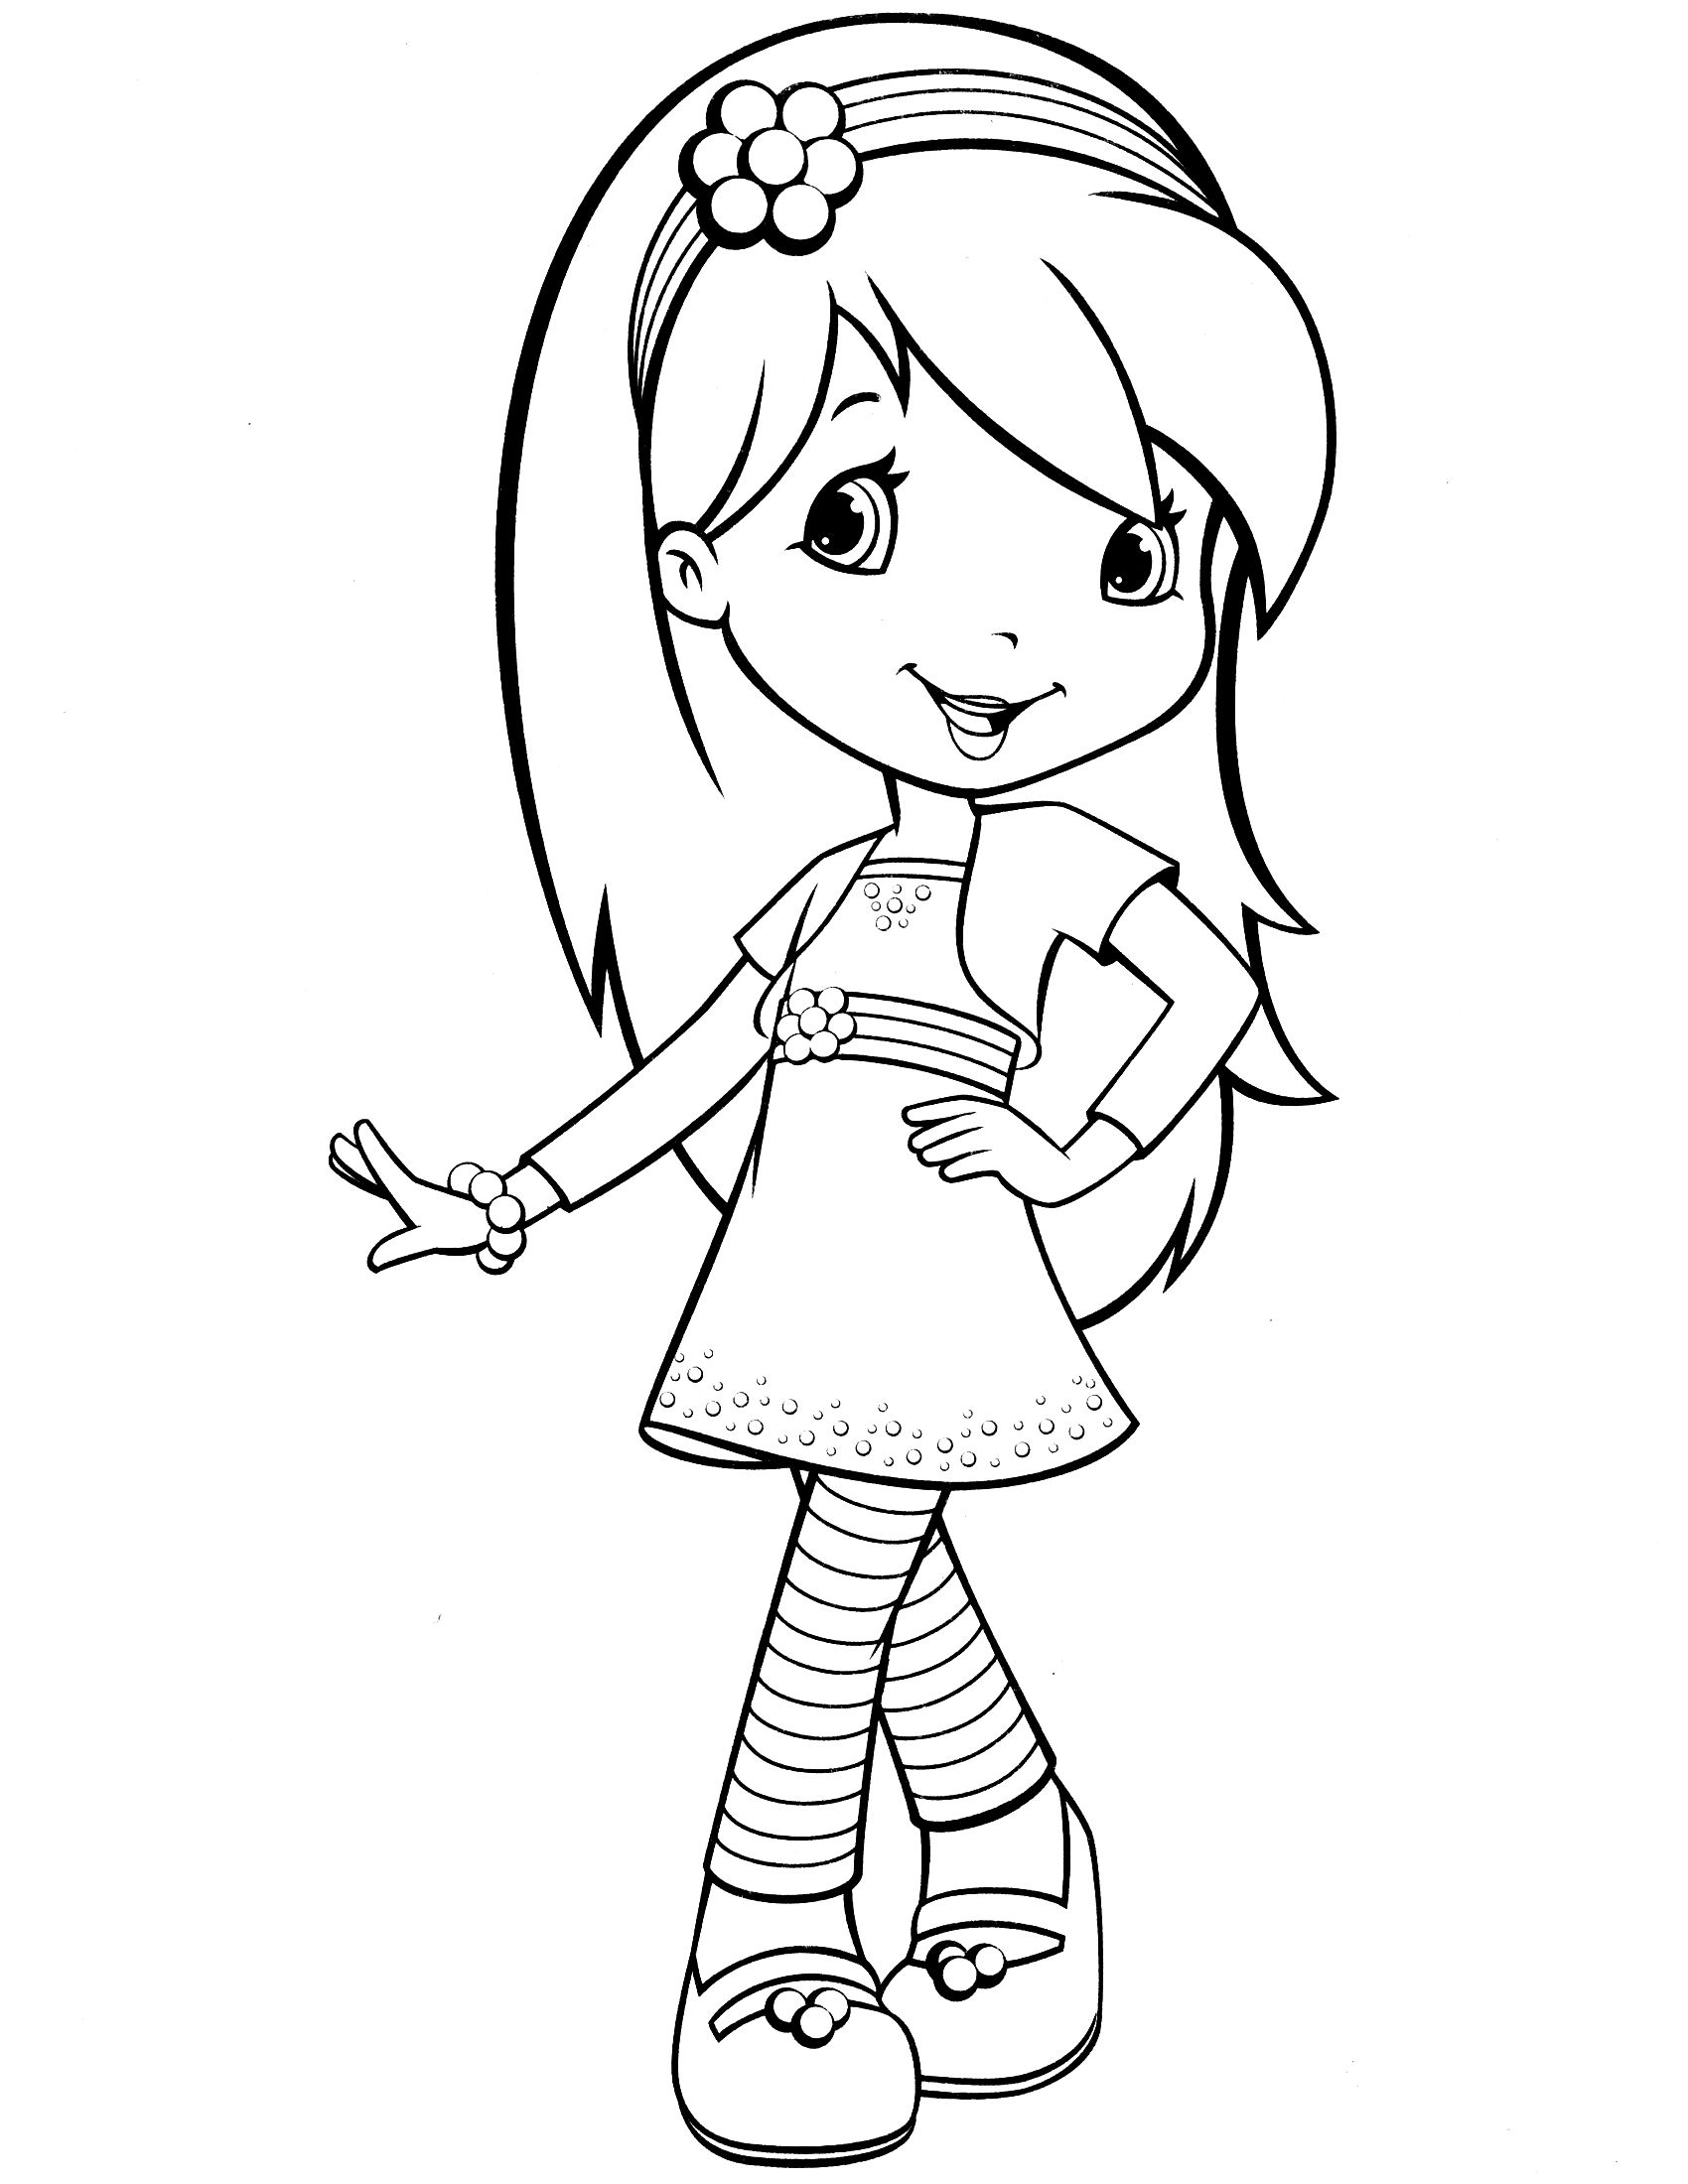 Printable Strawberry Shortcake Coloring Pages Pdf - Coloring Pages For Kids Strawberry Shortcake